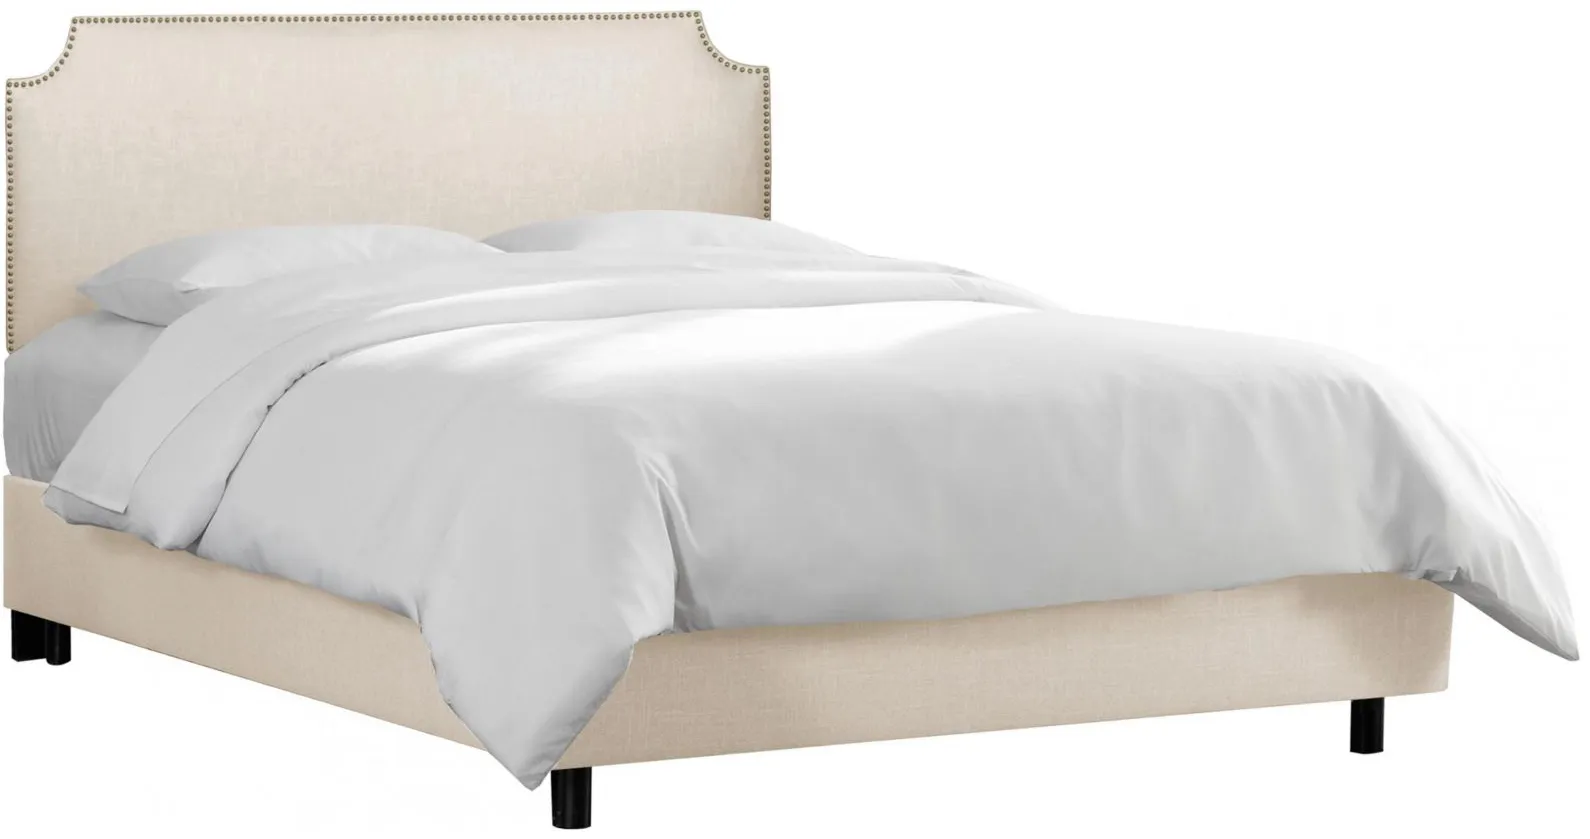 McGee Bed in Linen Talc by Skyline